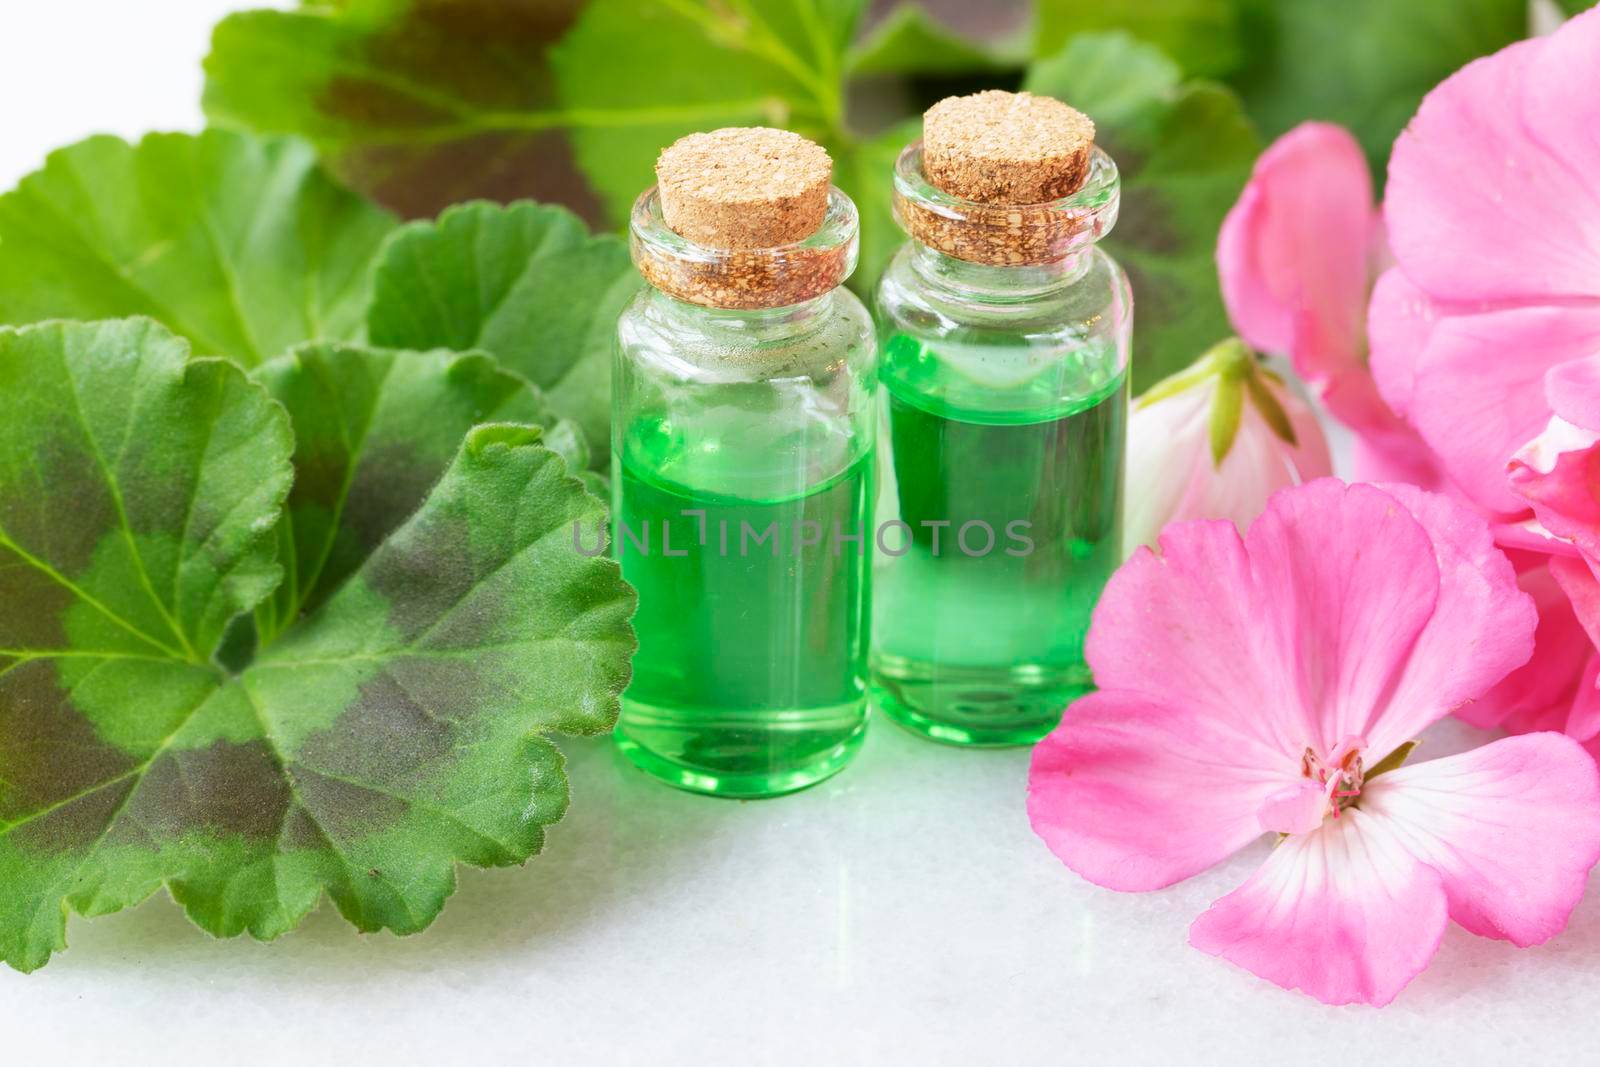 Plant extract in viles with geranium leaves and pink flowers